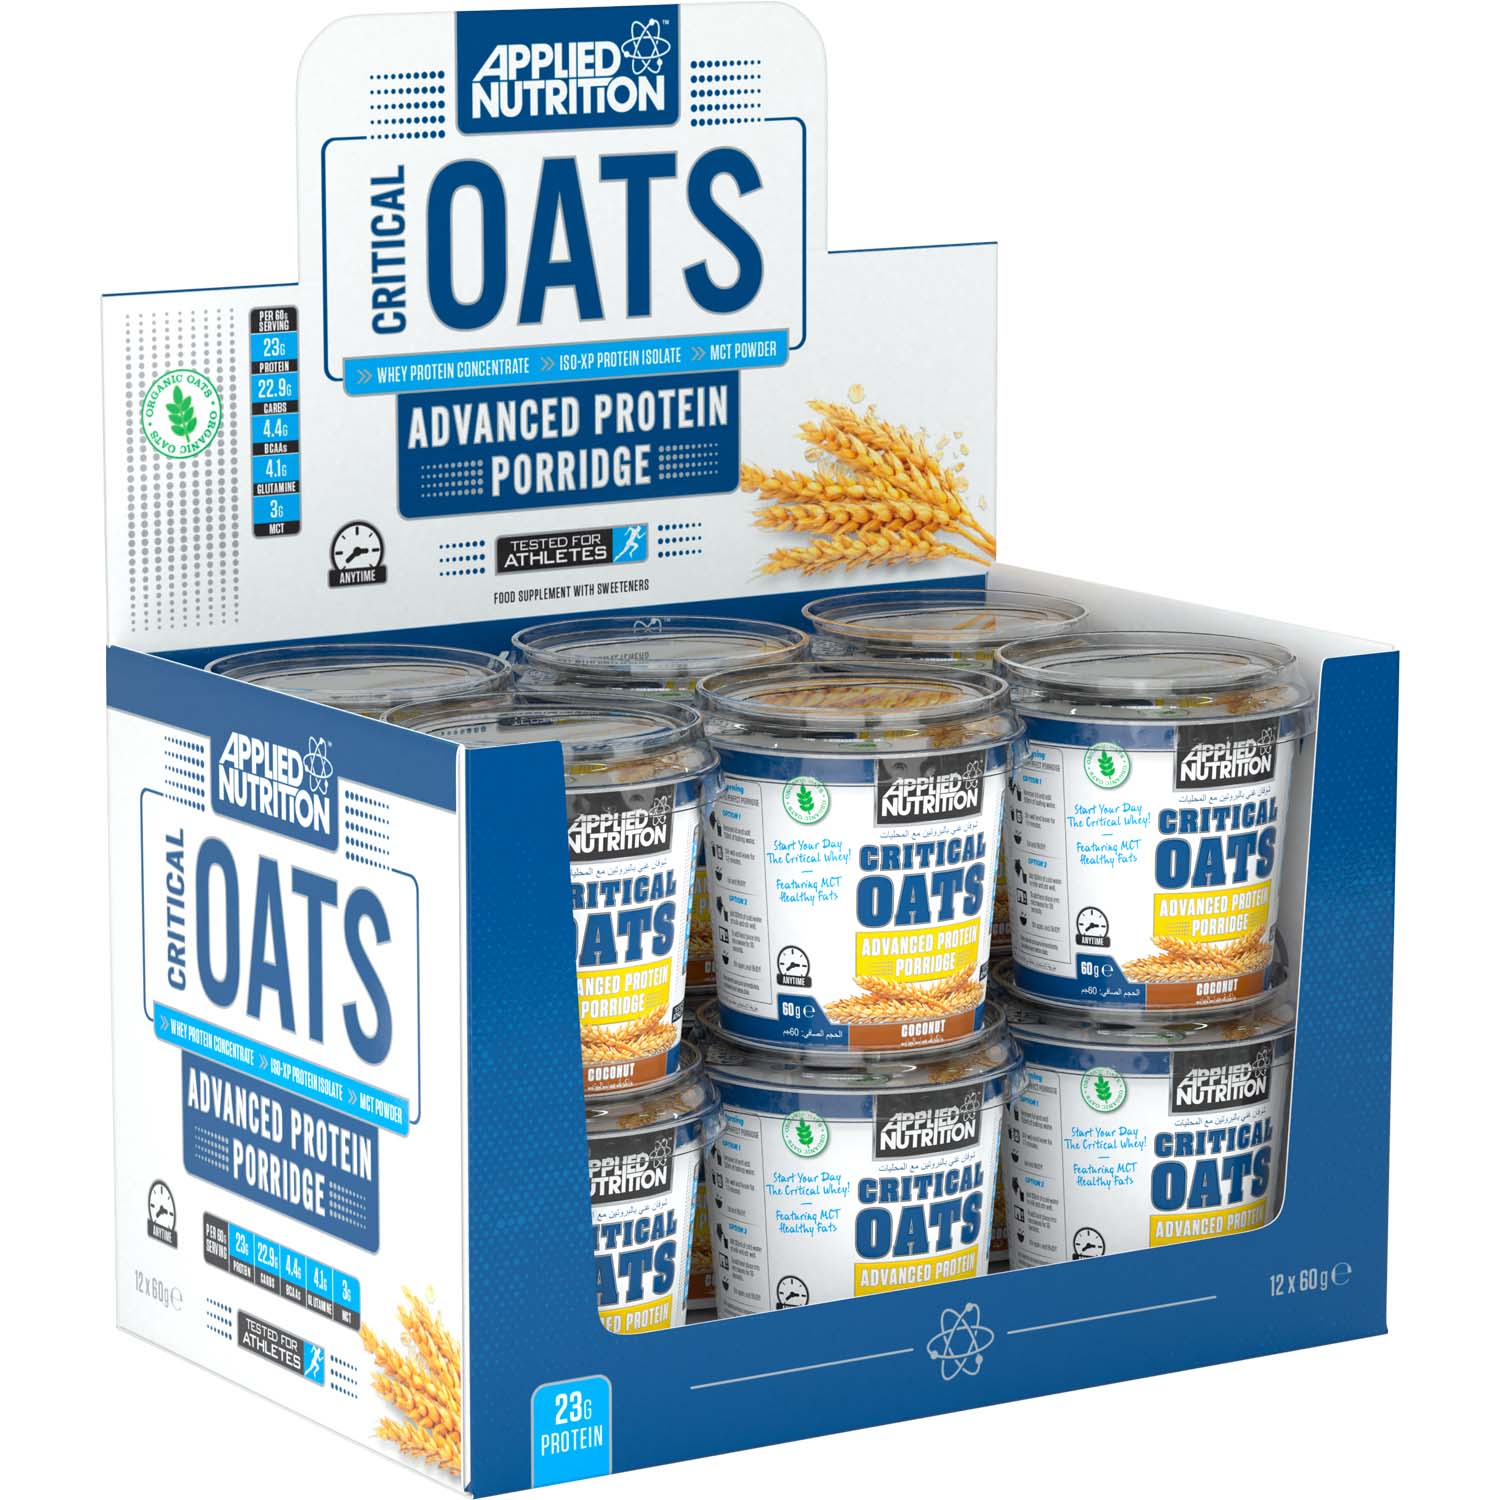 Applied Nutrition Critical Oats, Coconut, Box of 12 Pieces